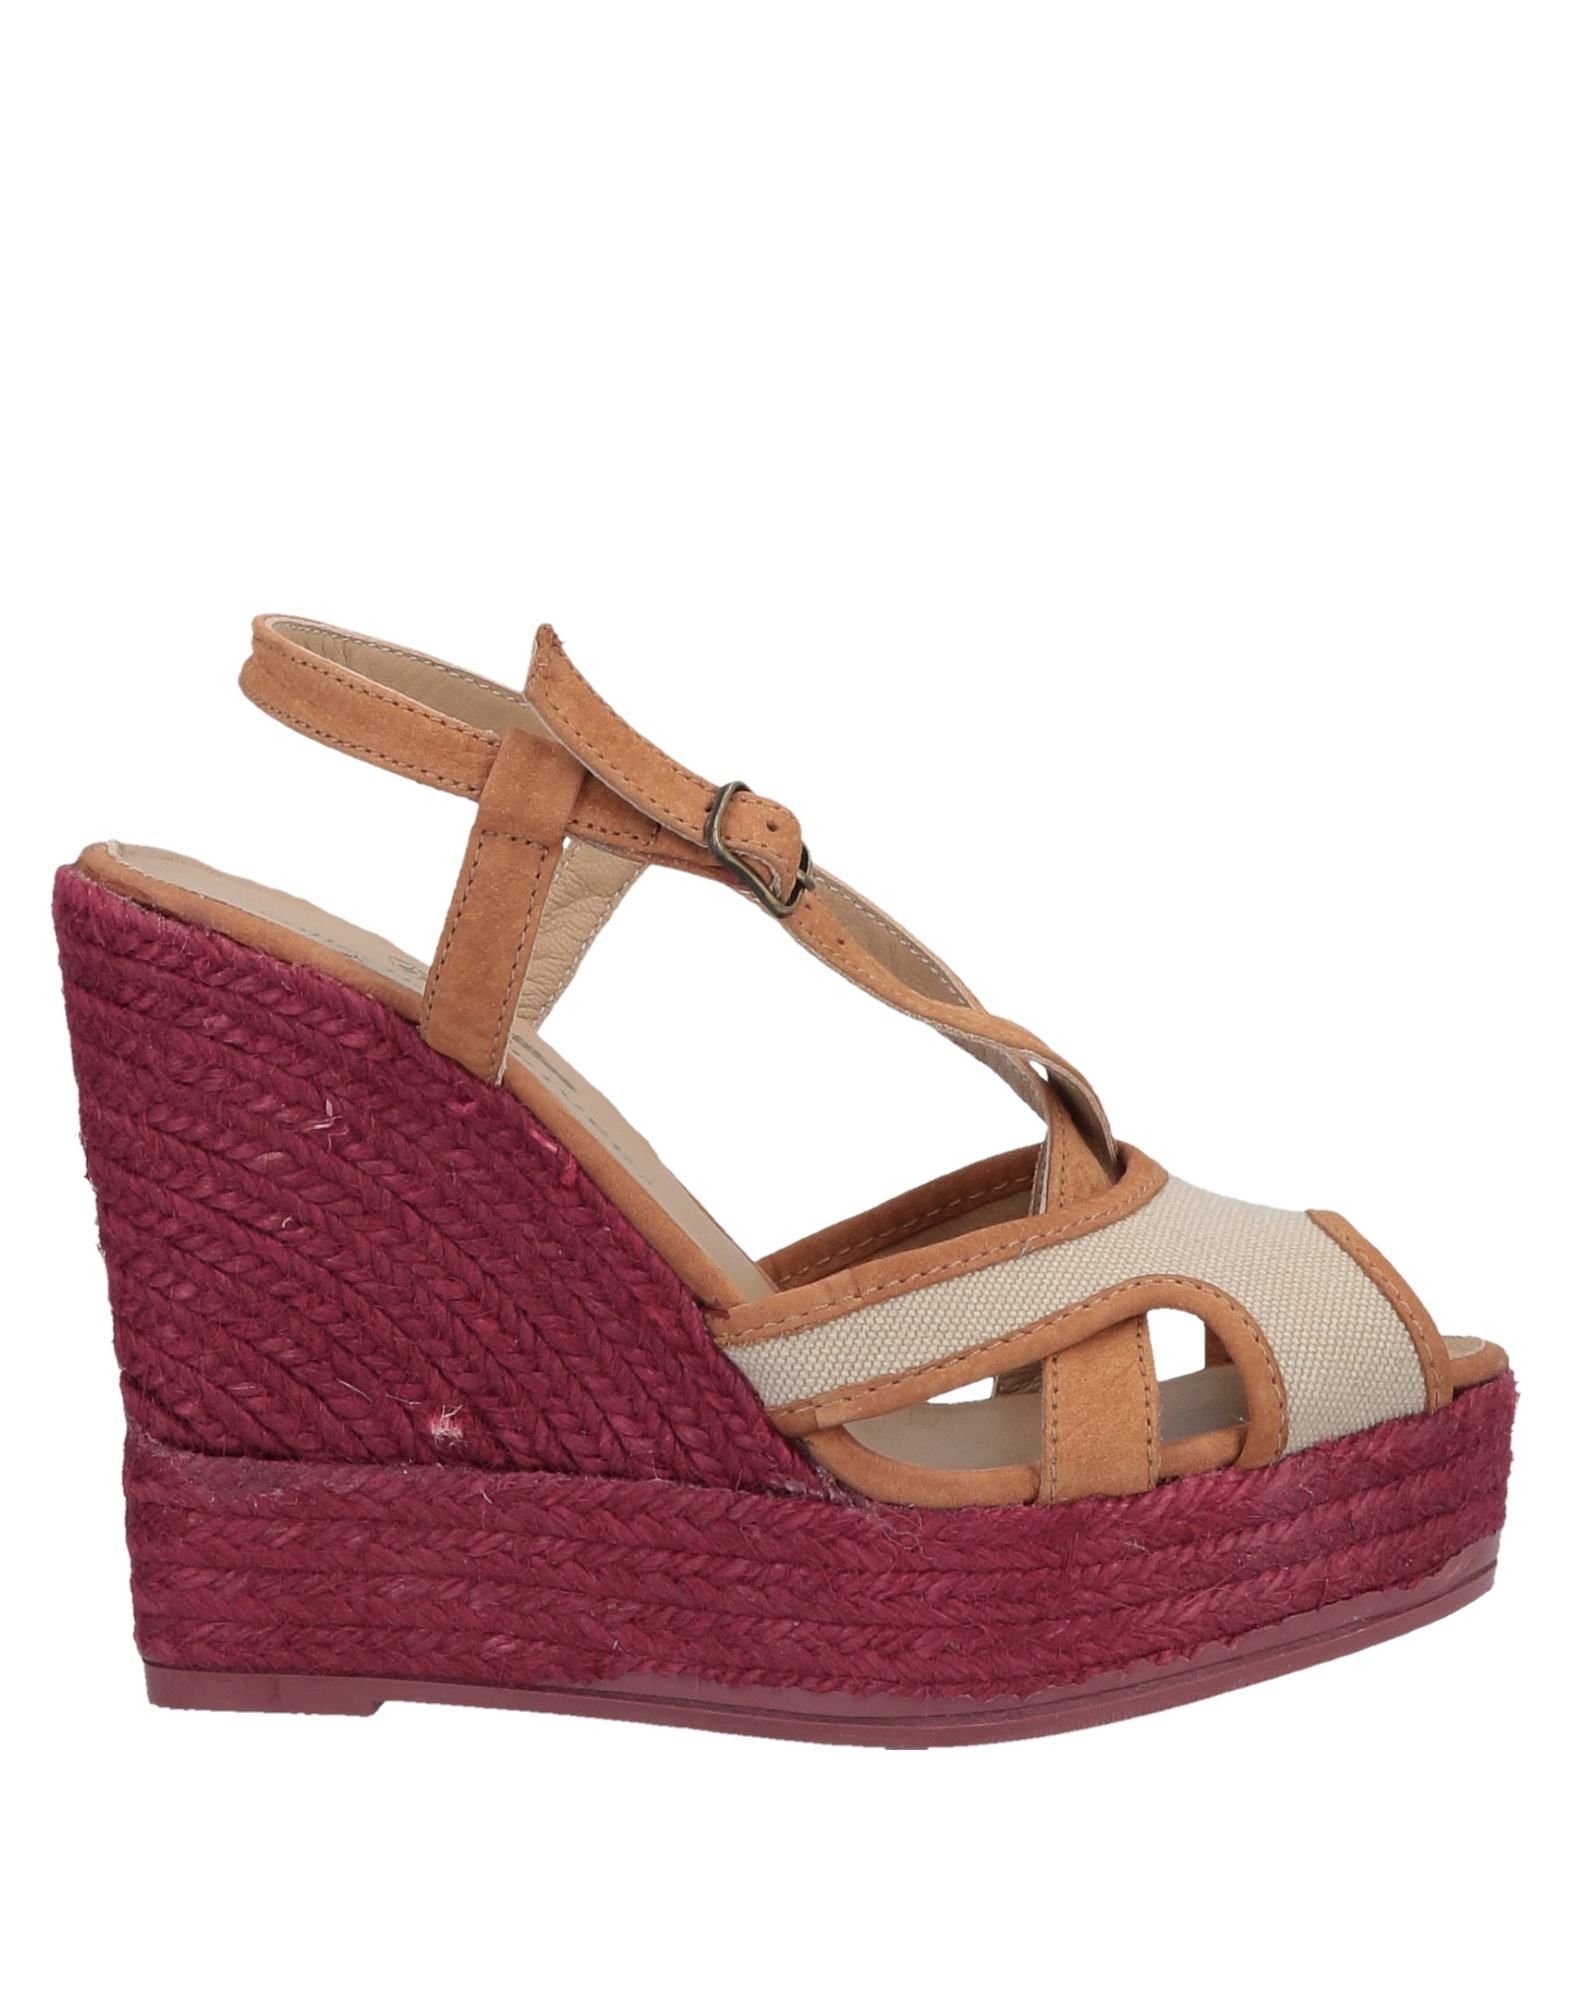 ESPADRILLES and COLLECTION PRIVEE? Sandals - Item 11621386